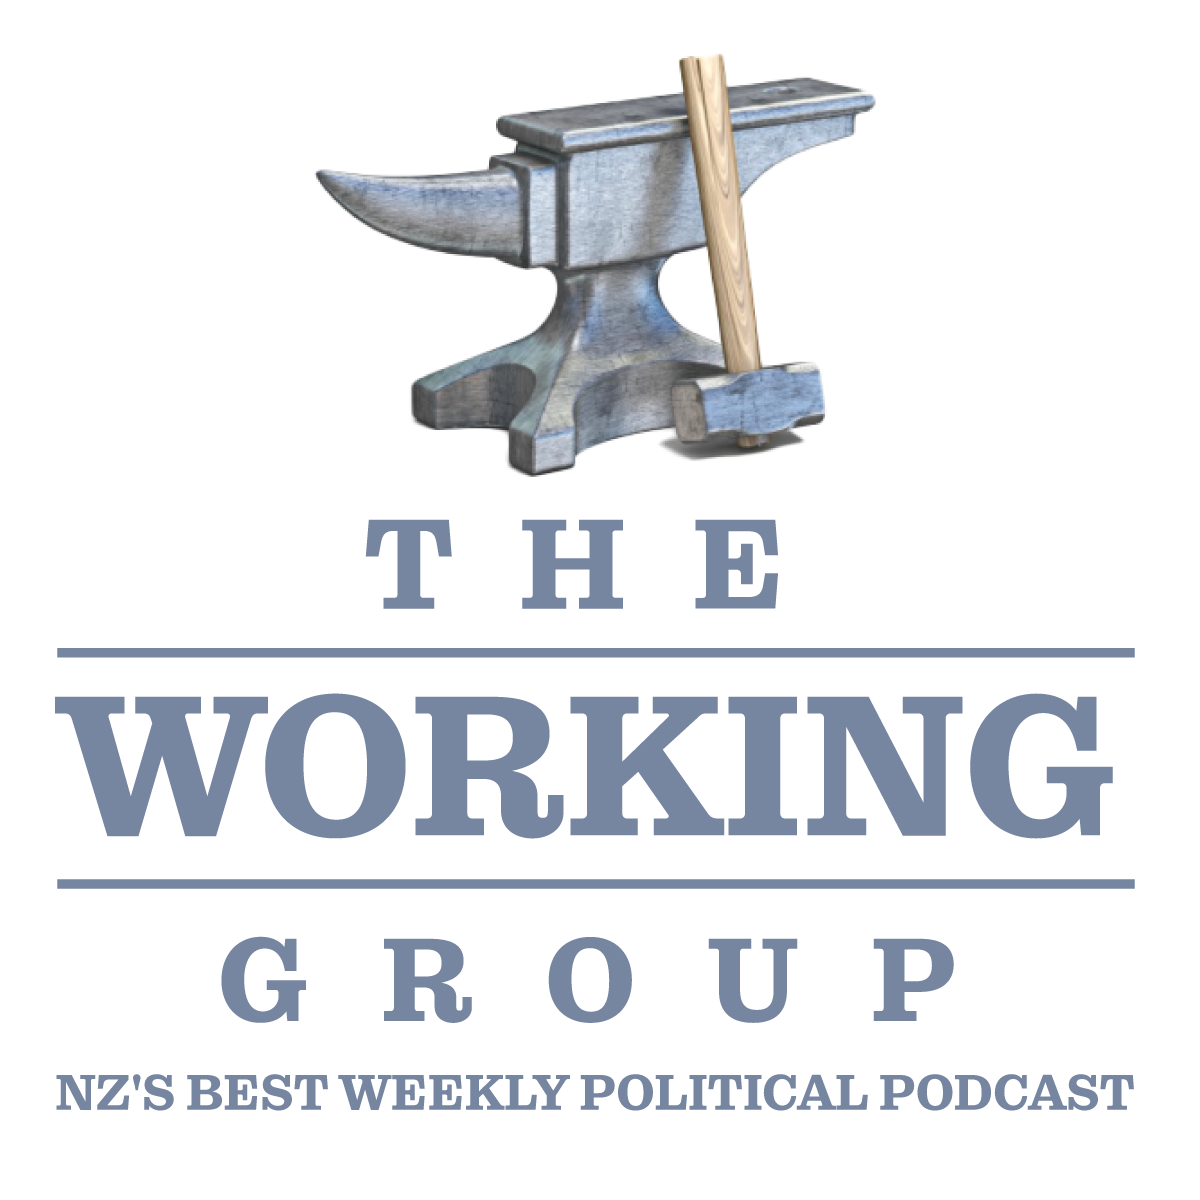 The Working Group Weekly Political Podcast with Chris Trotter, Dr Oliver Hartwich & Damien Grant